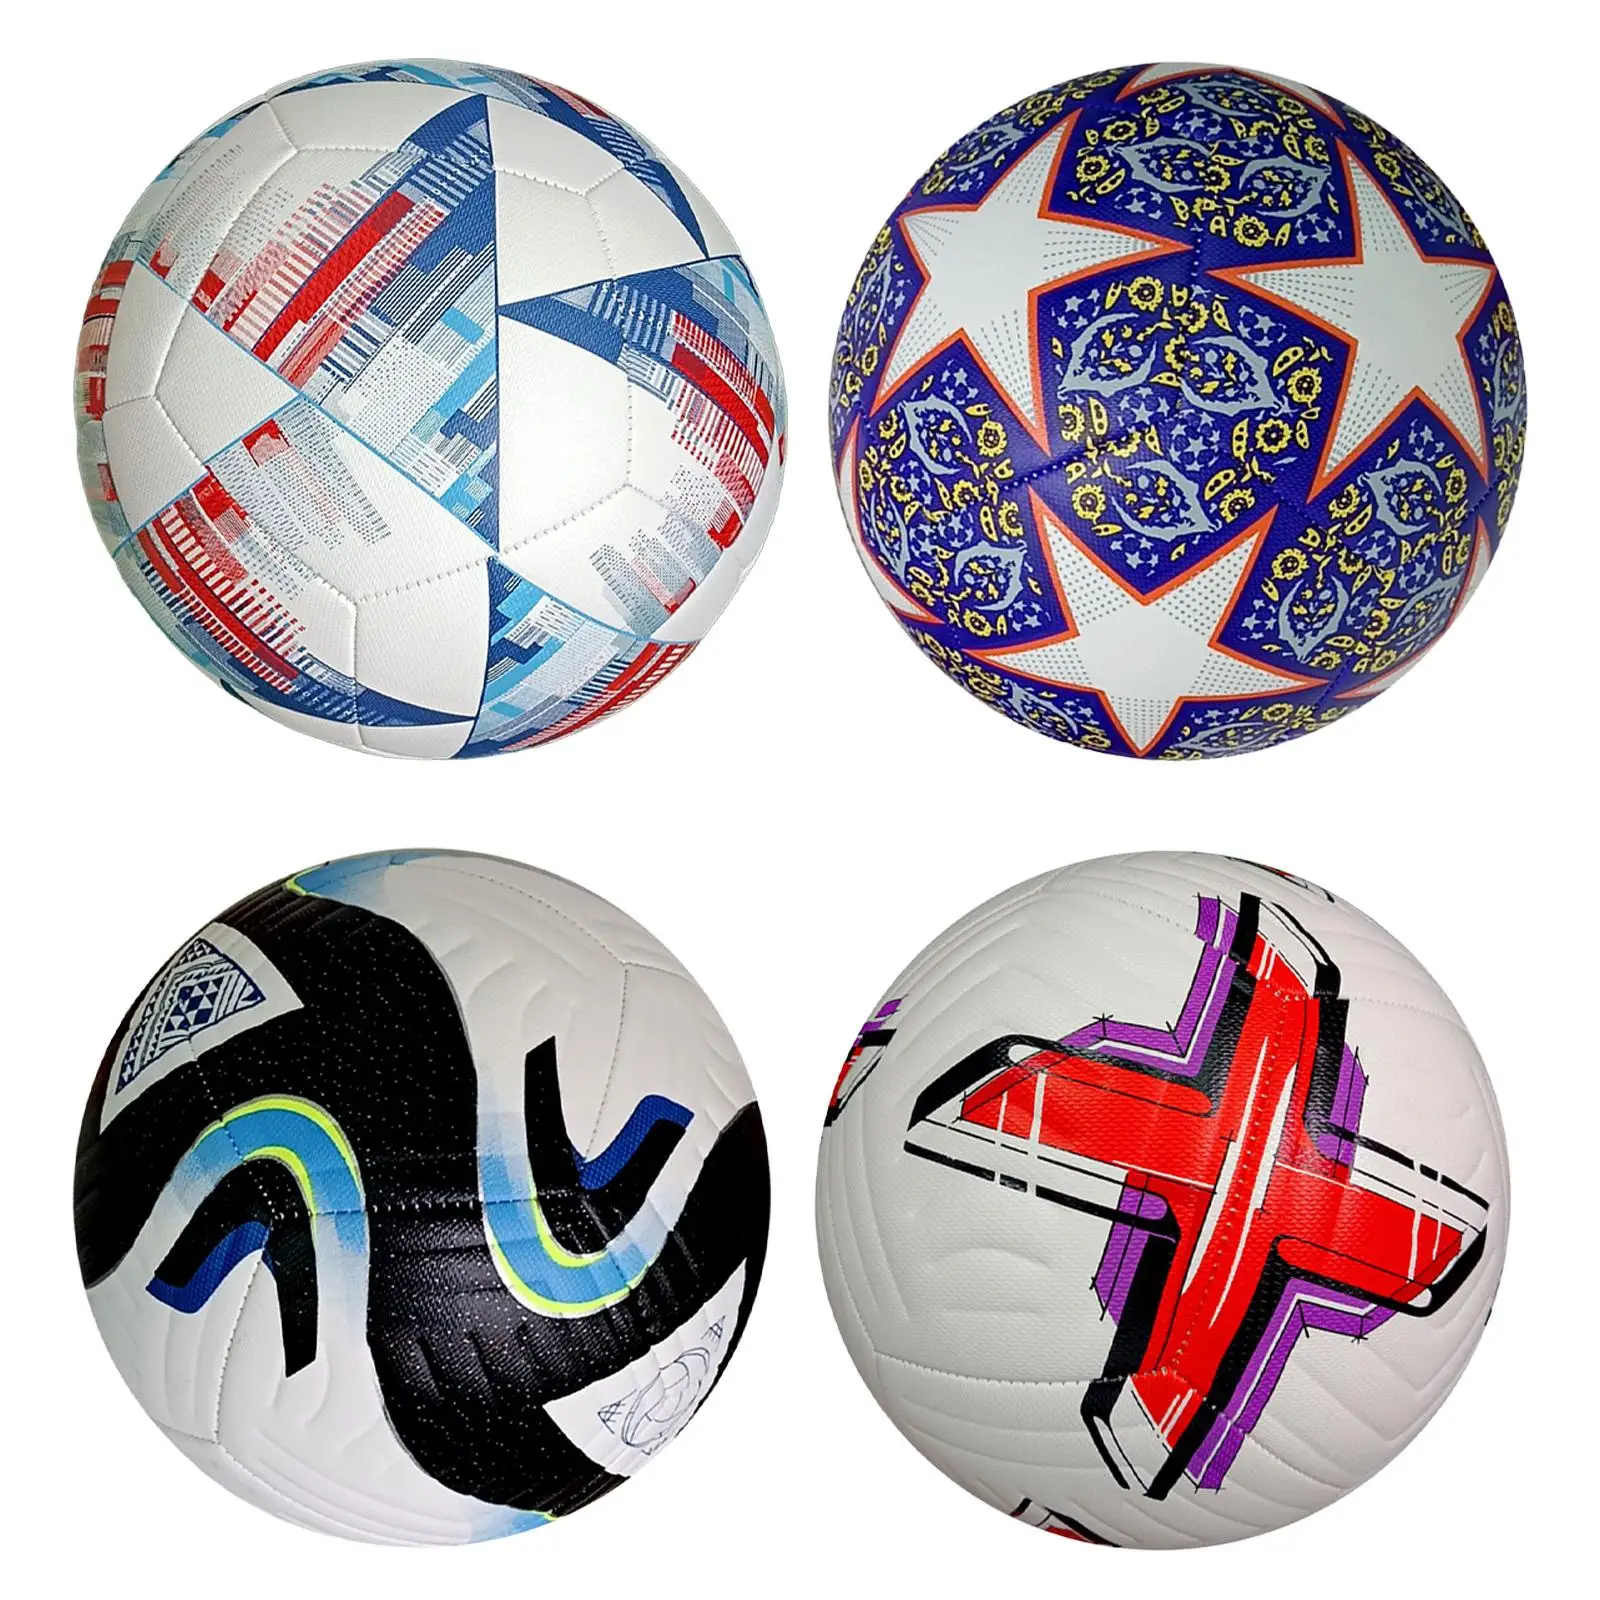 Soccer Ball Size 5 Durable PU Leather Machine Stitched Professional Match Ball for Game Competition Indoor Outdoor Playing